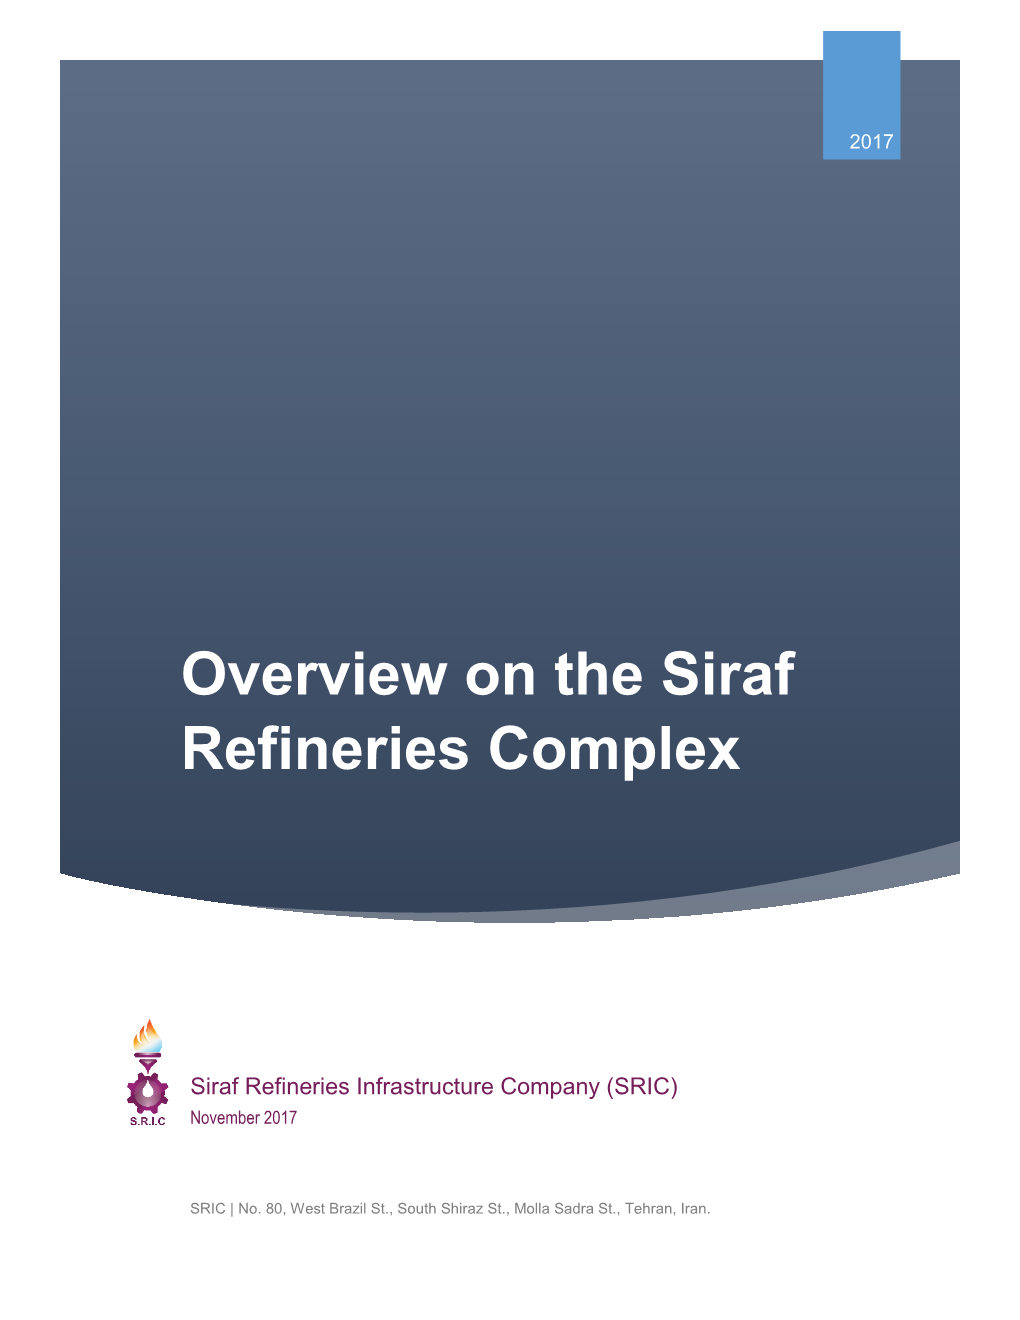 Overview on the Siraf Refineries Complex